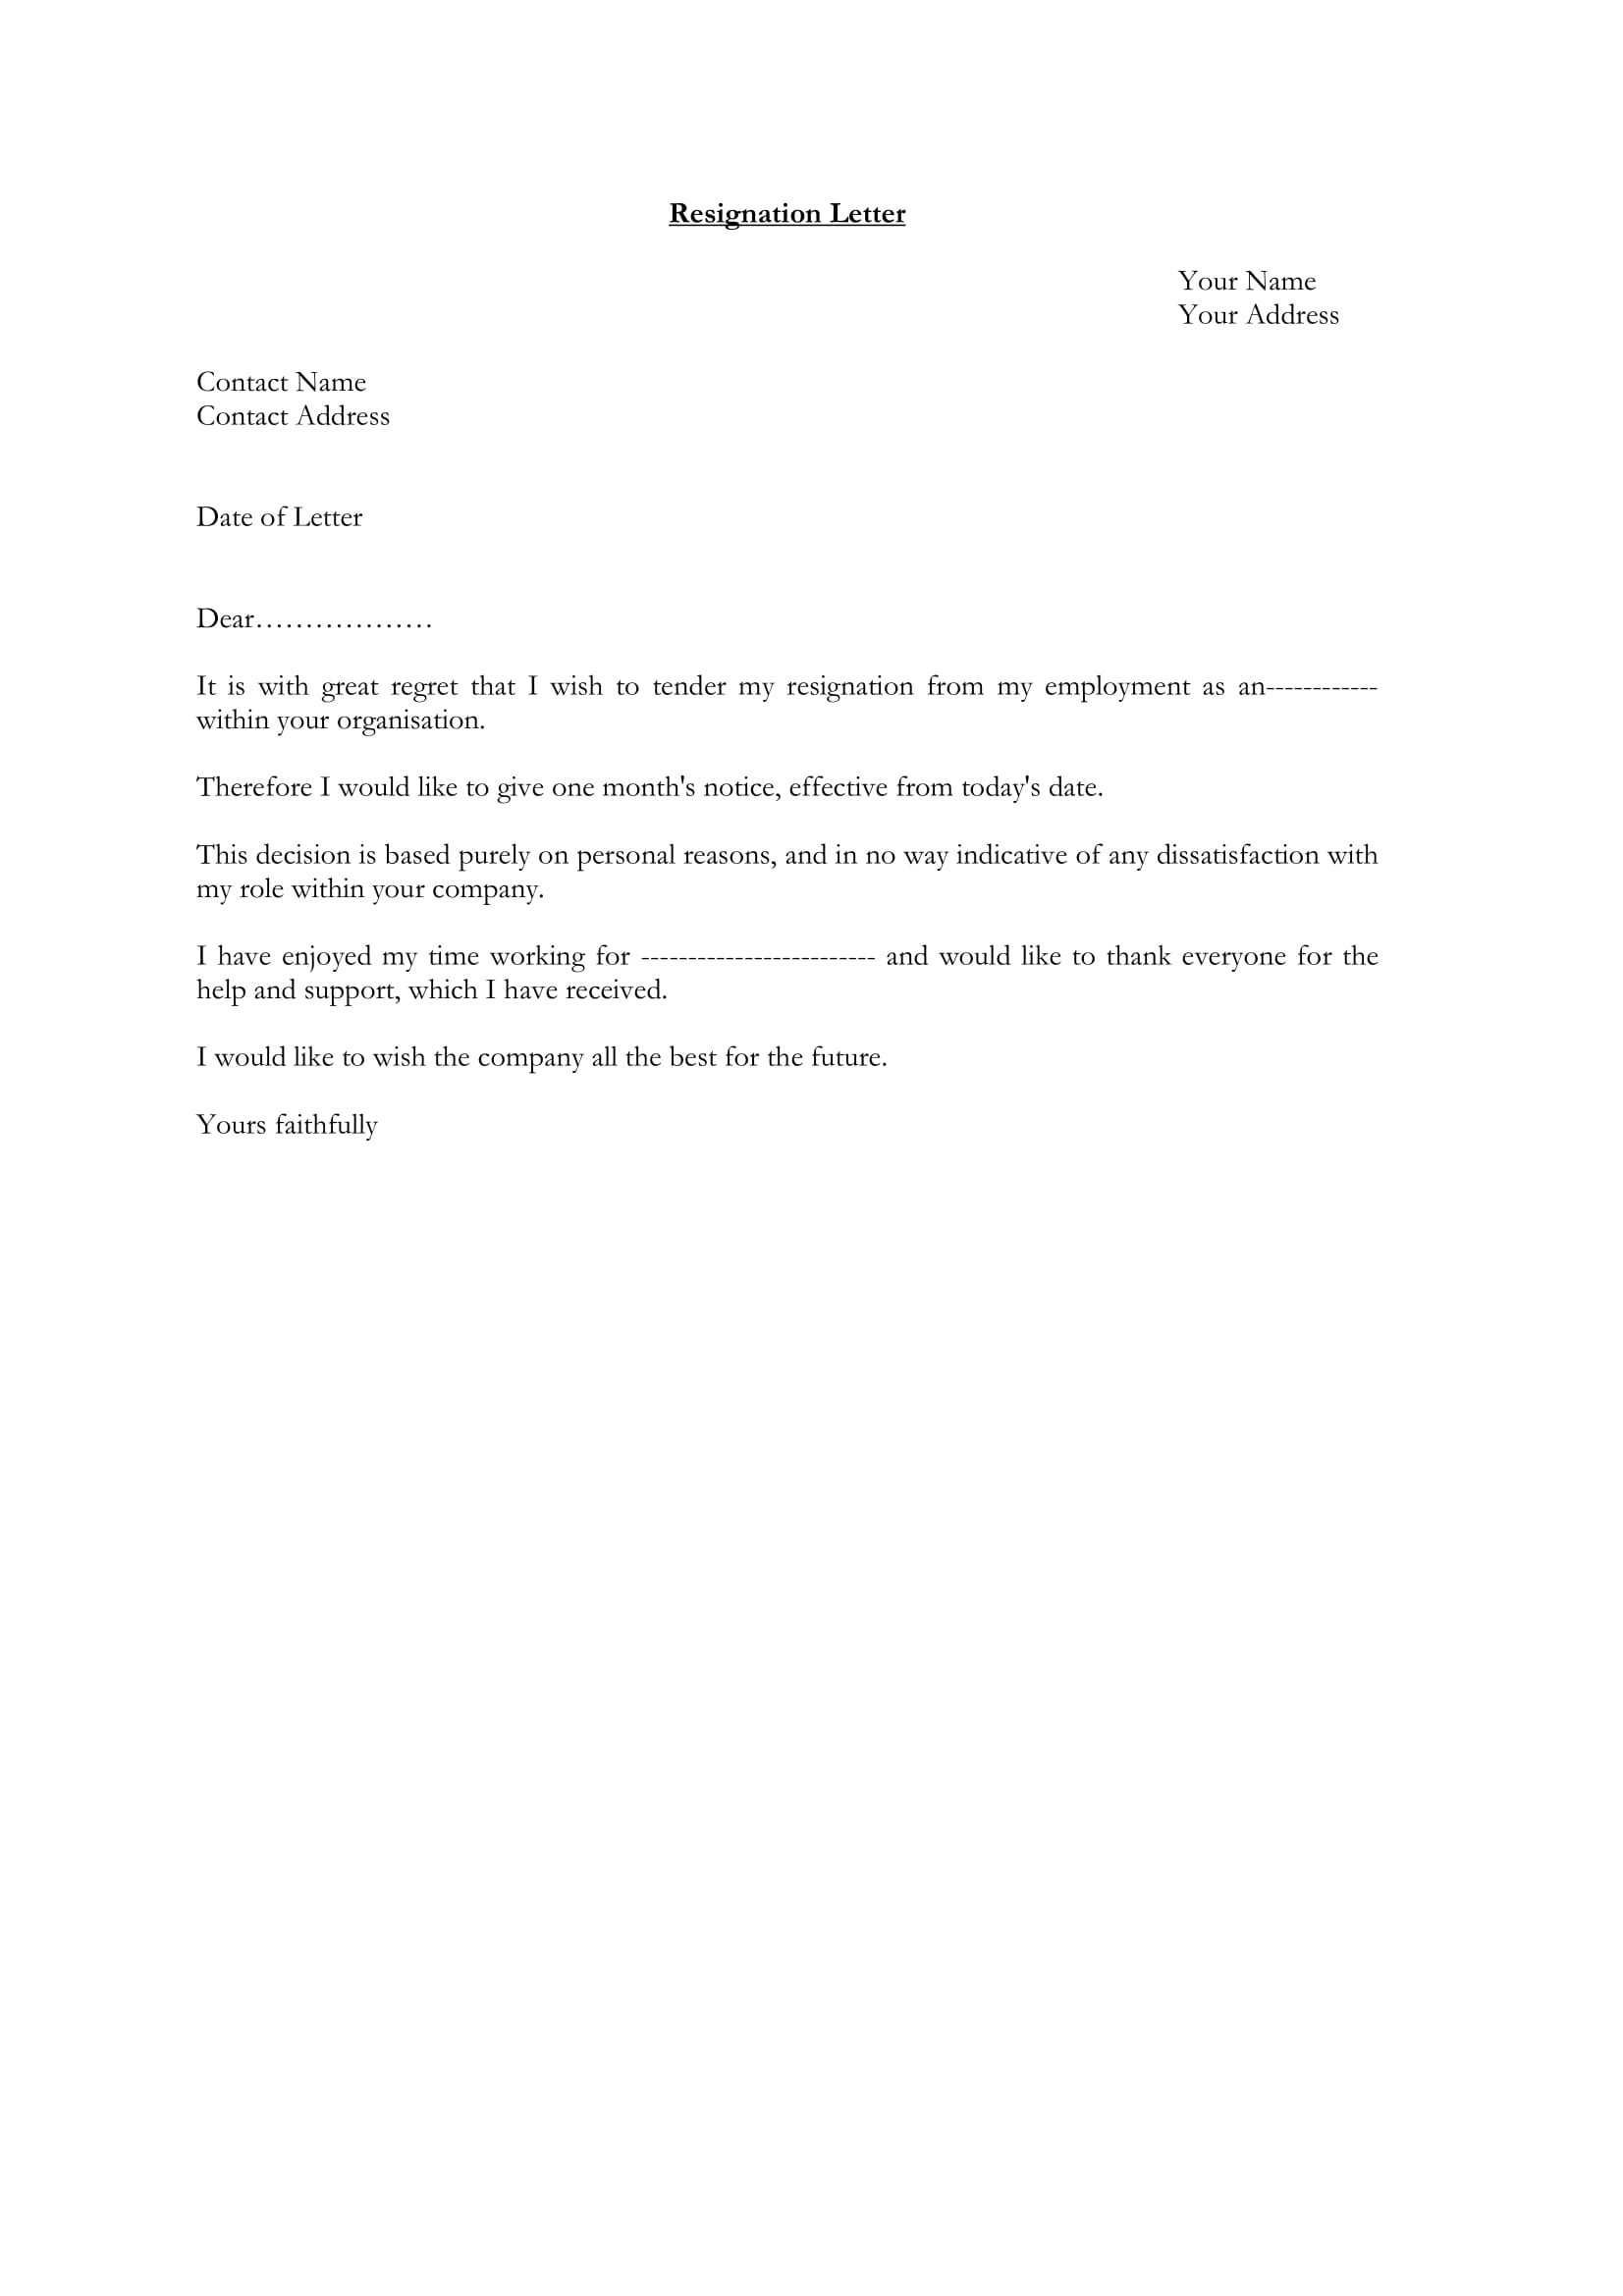 Simple Resignation Letter Sample For Personal Reasons from images.examples.com